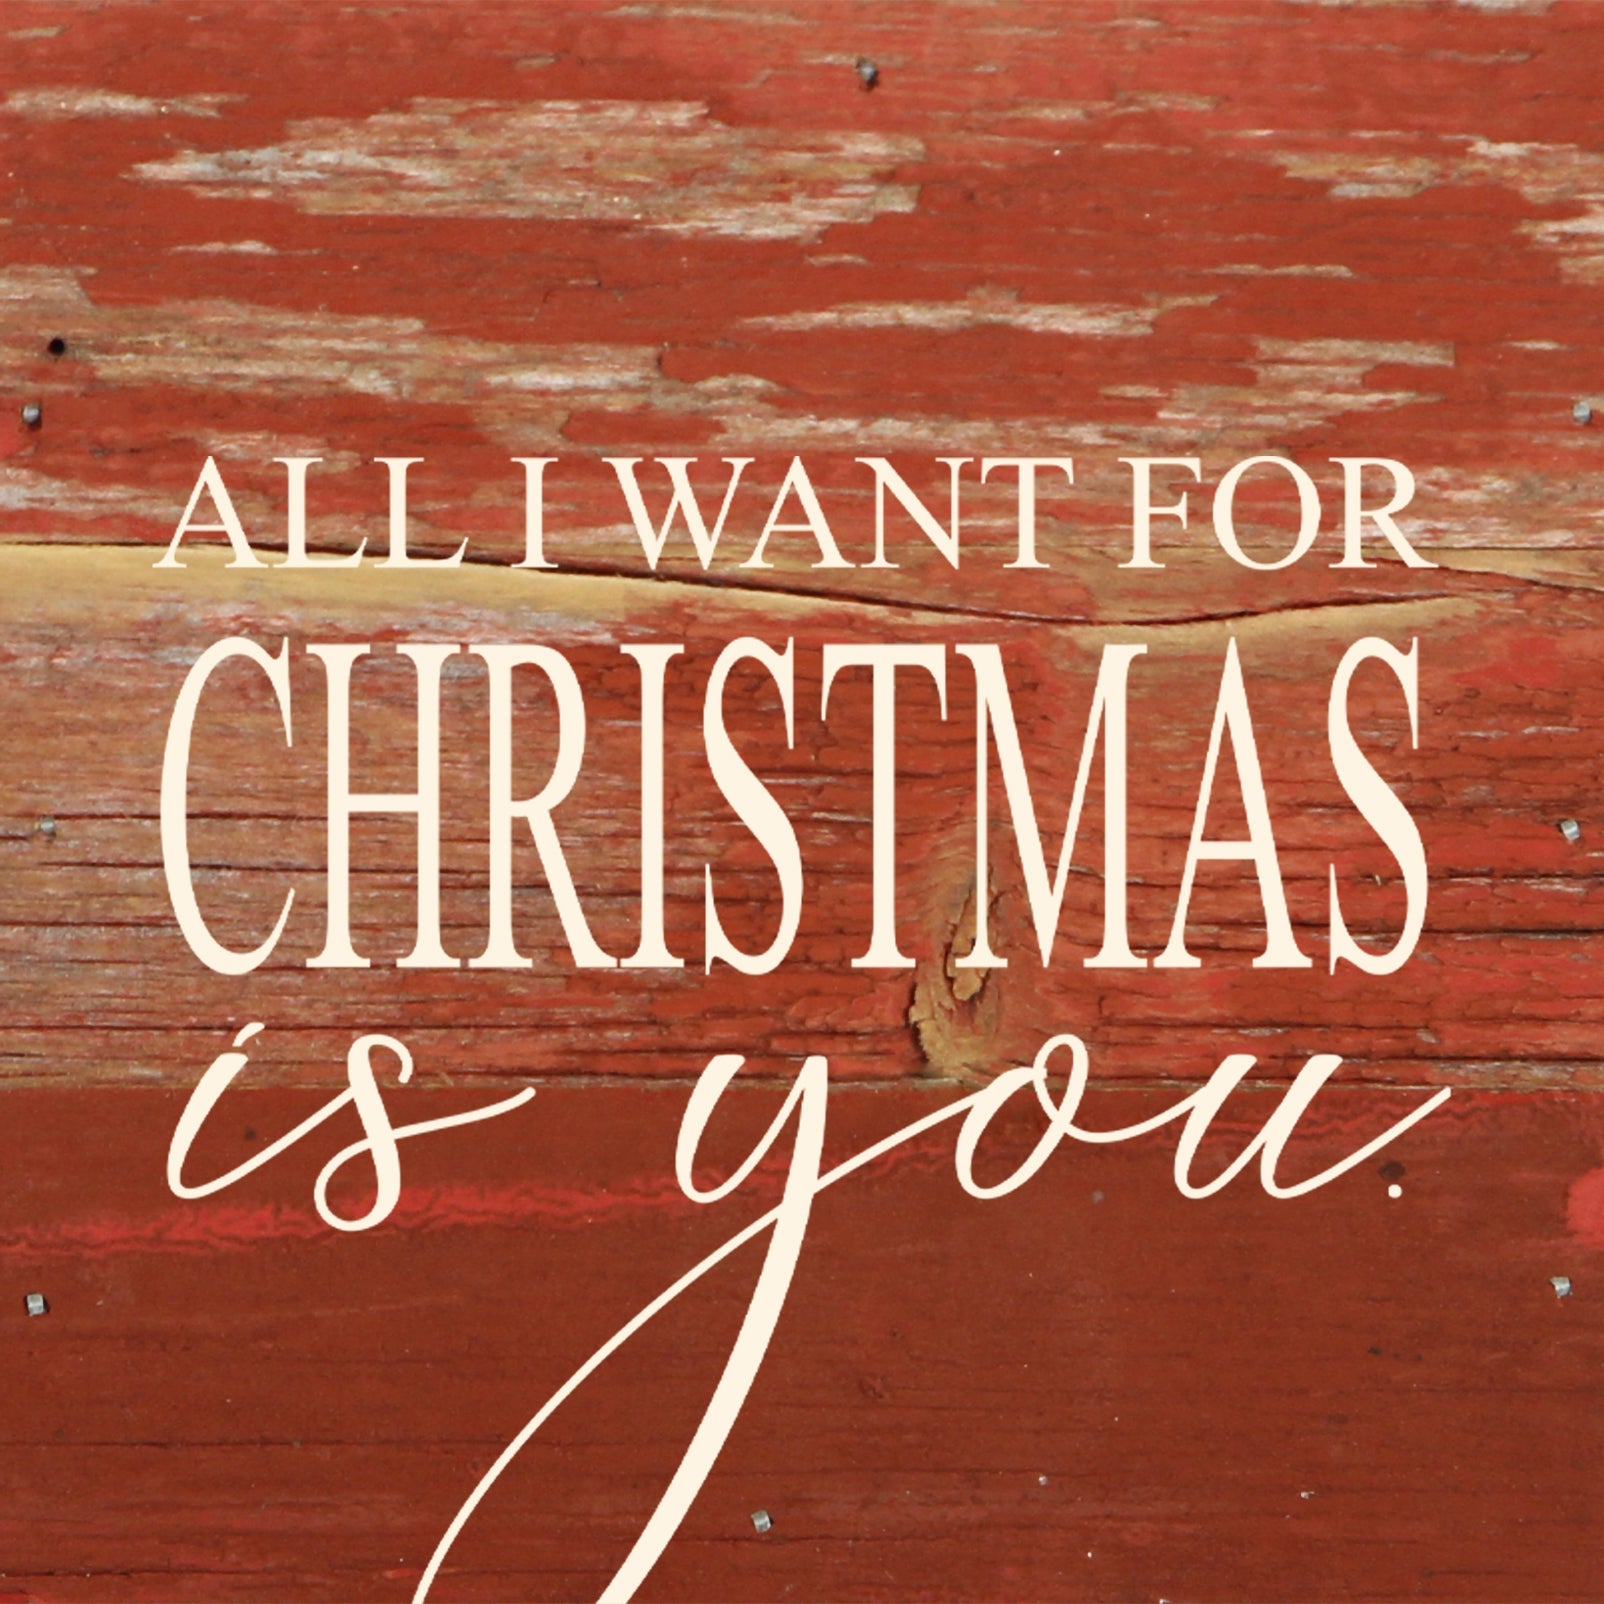 All I want for Christmas is you. (script) / 6"x6" Reclaimed Wood Sign